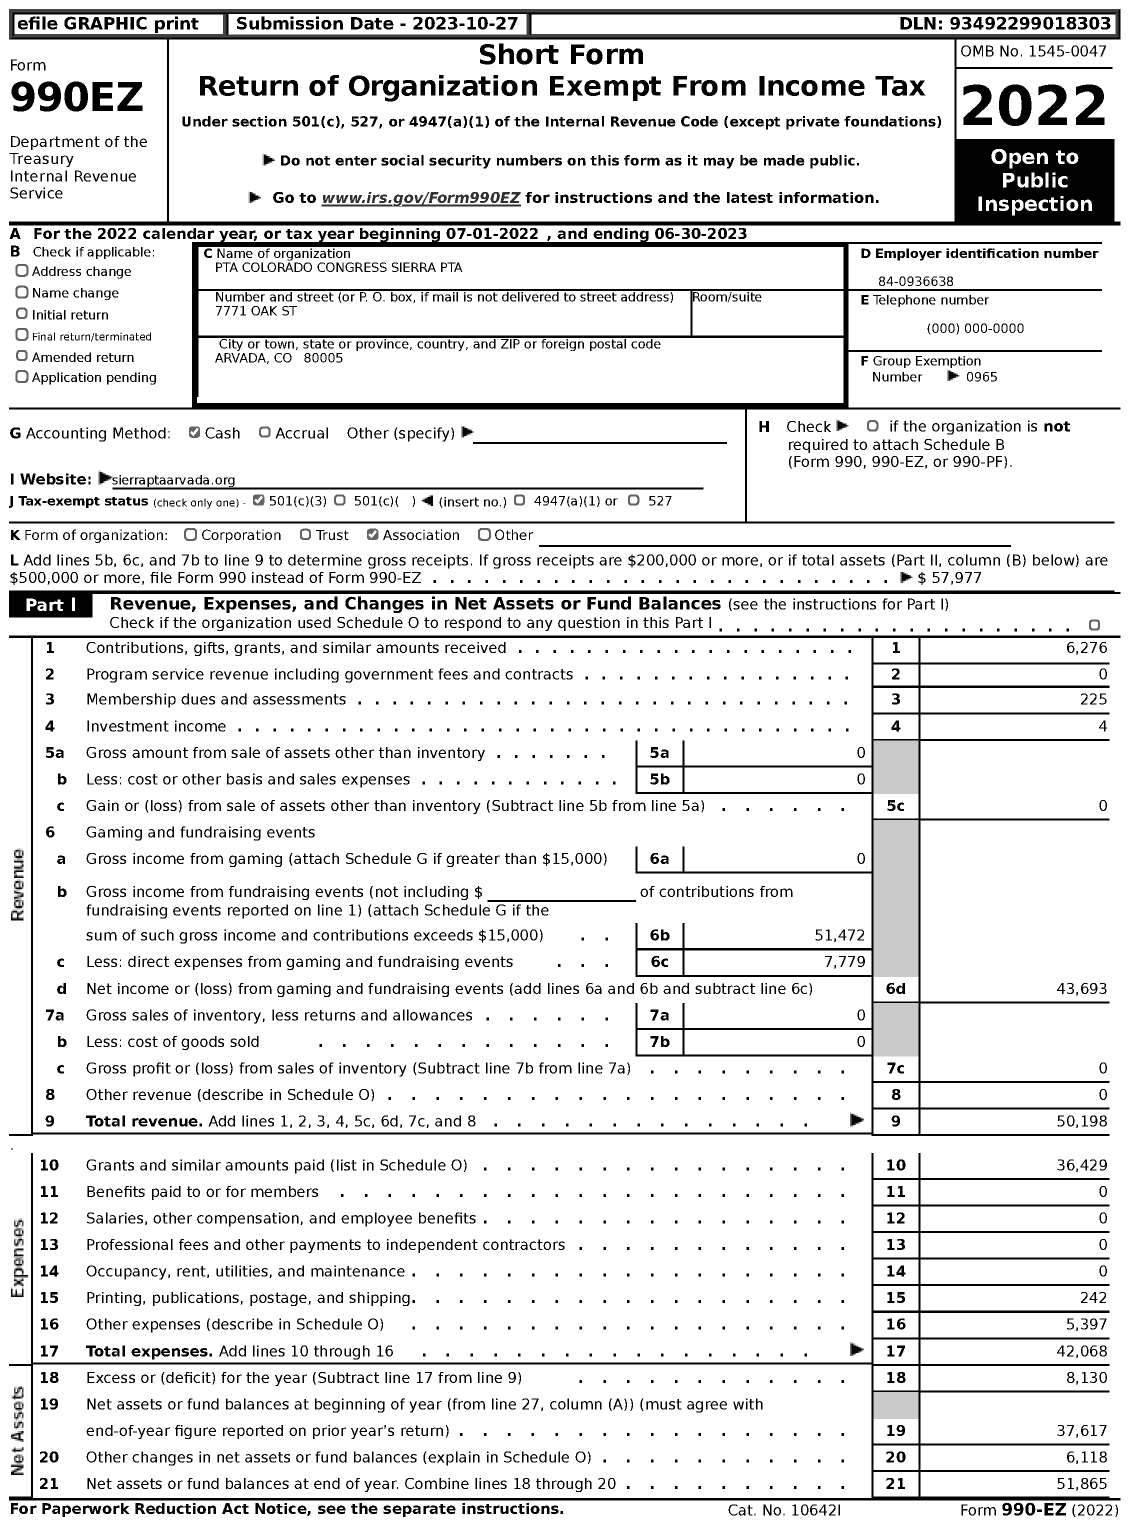 Image of first page of 2022 Form 990EZ for PTA Colorado Congress Sierra PTA